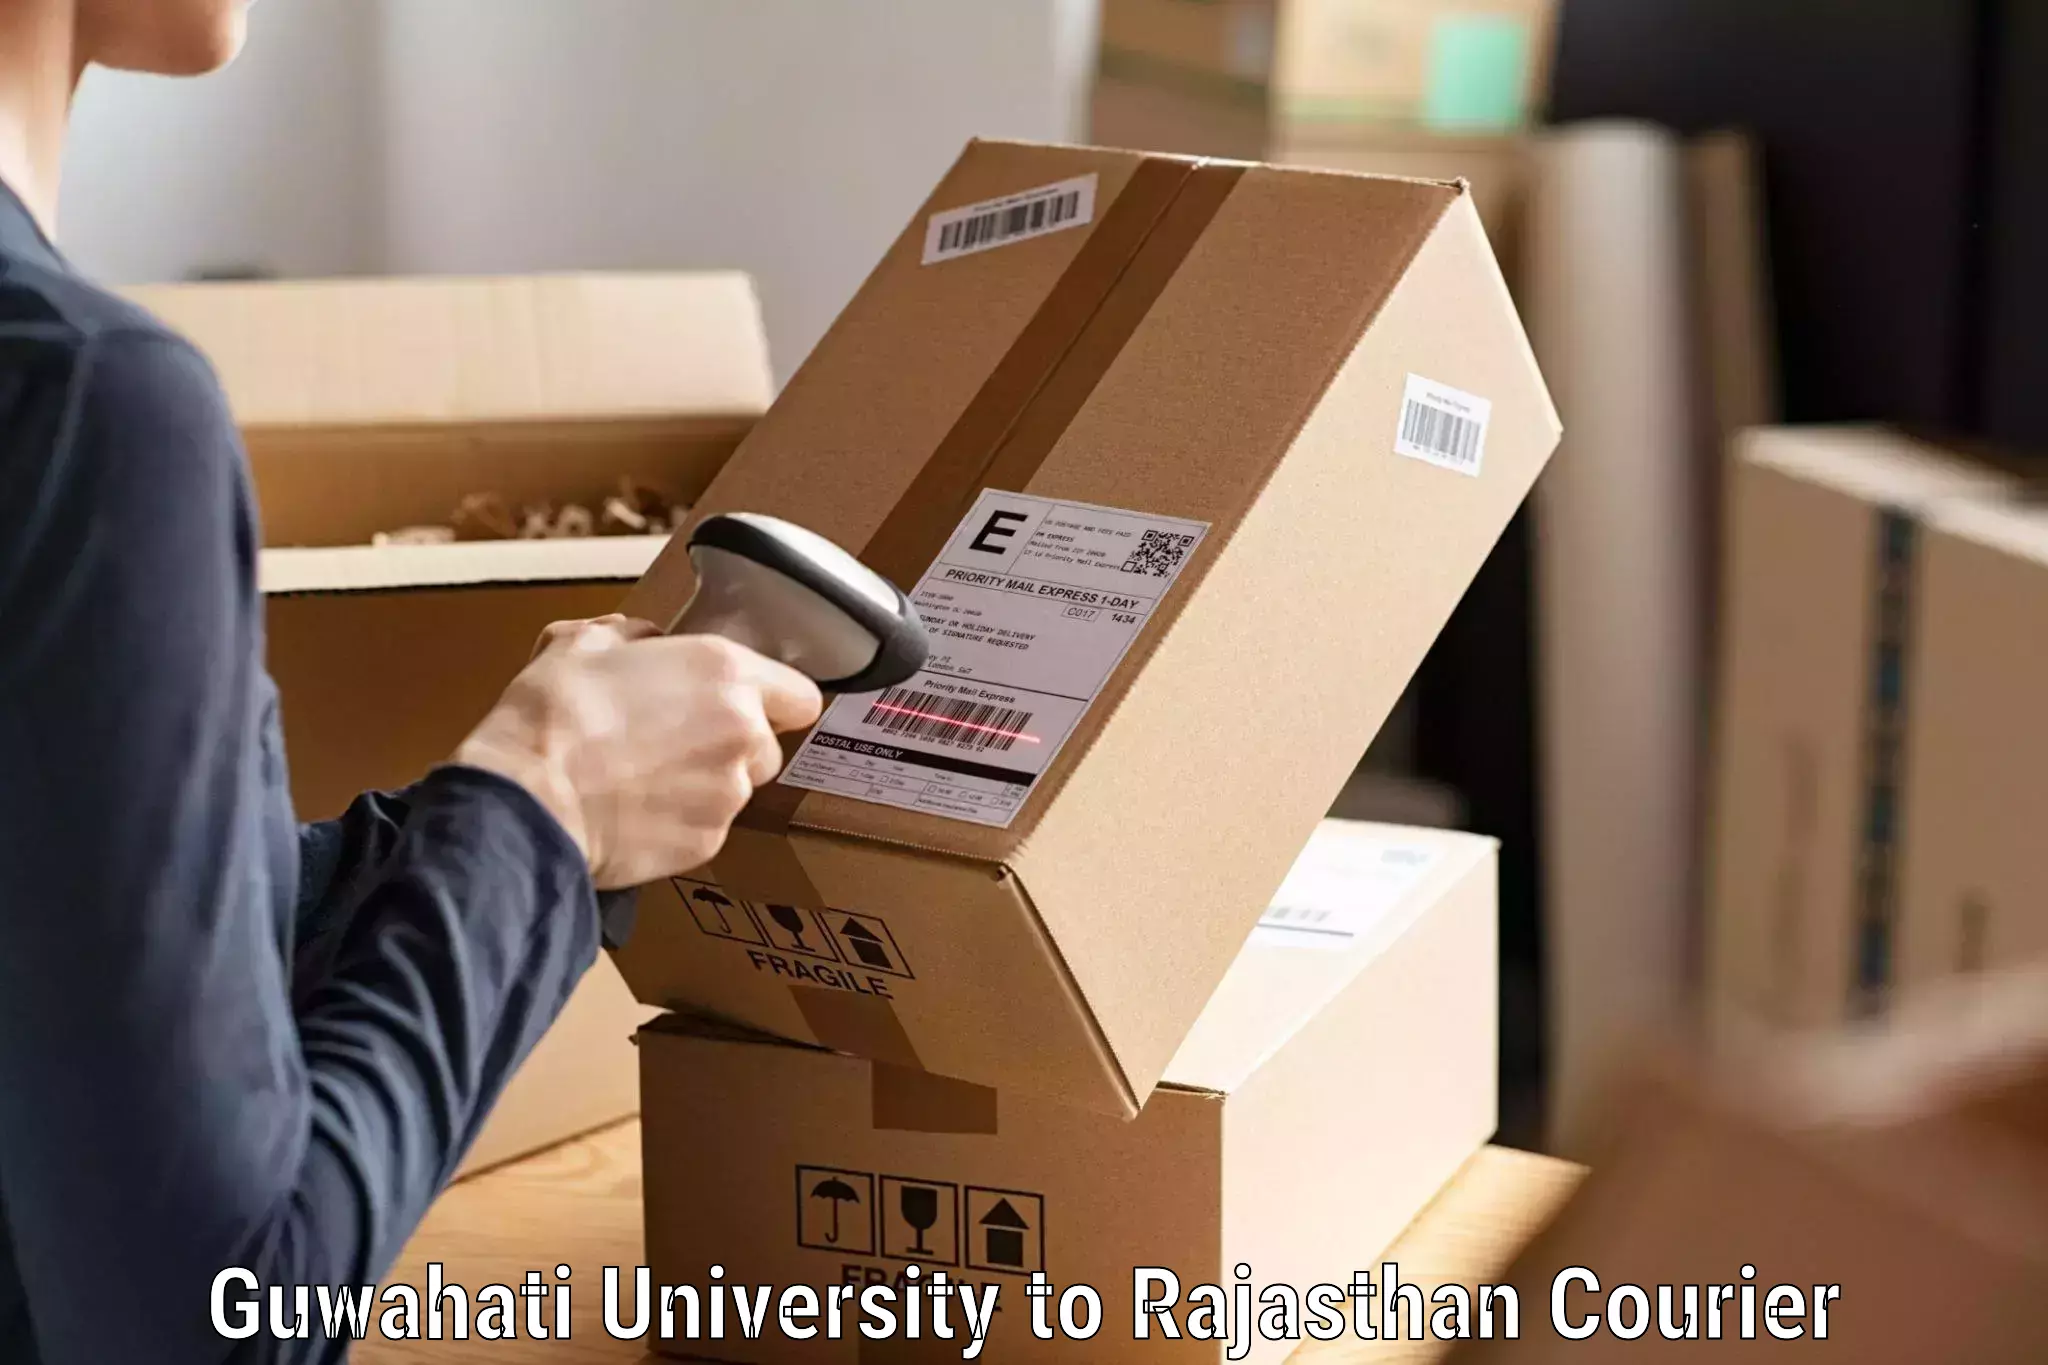 Professional courier services Guwahati University to Merta